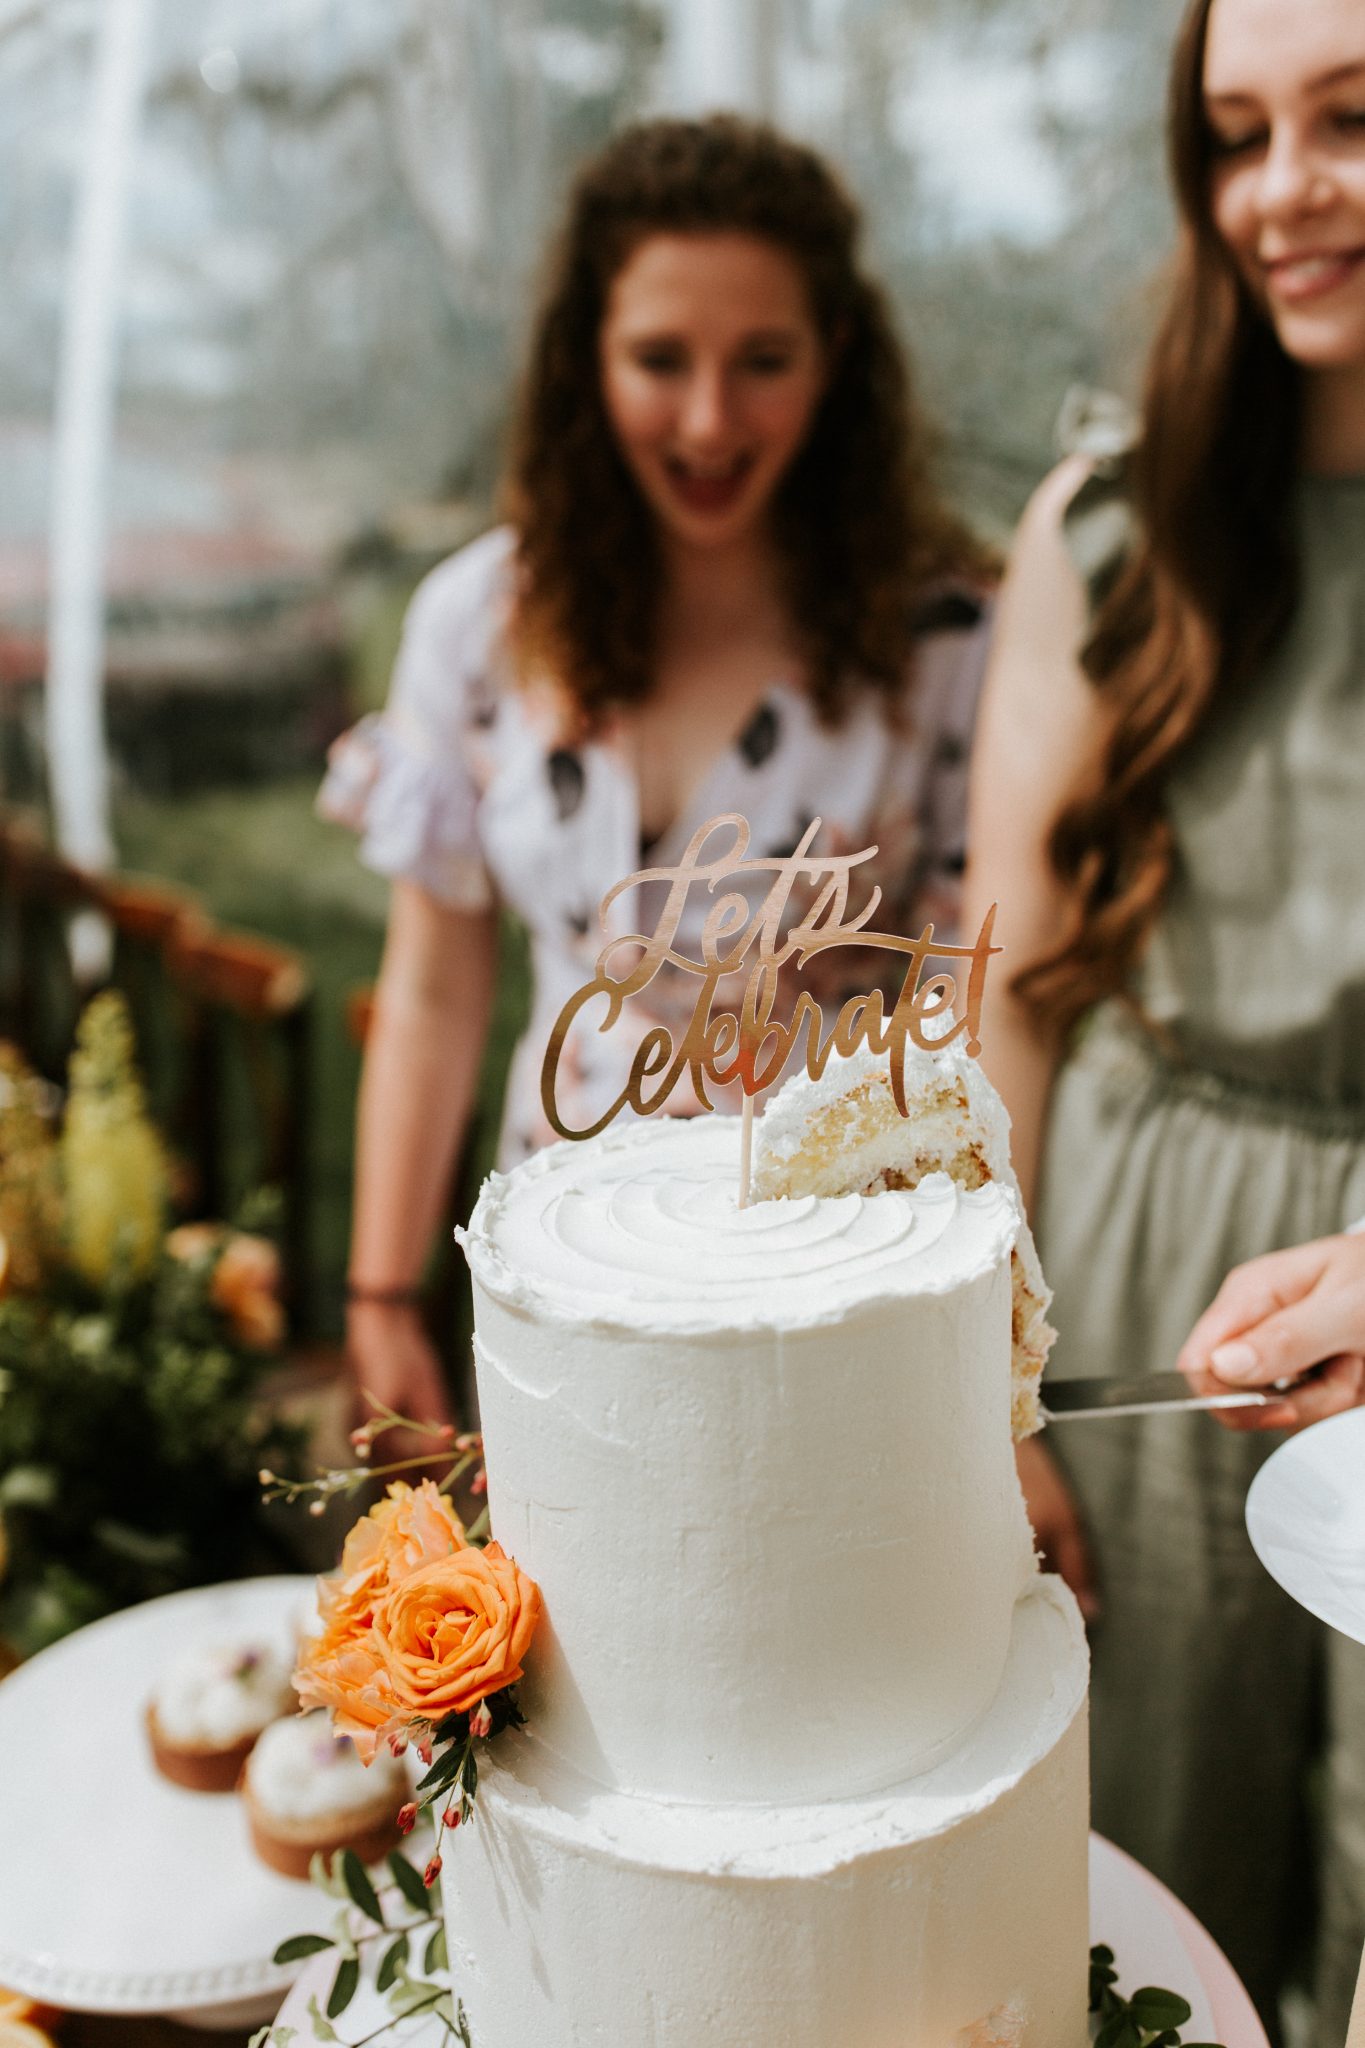 wedding party inspiration, party ideas, cake cutting